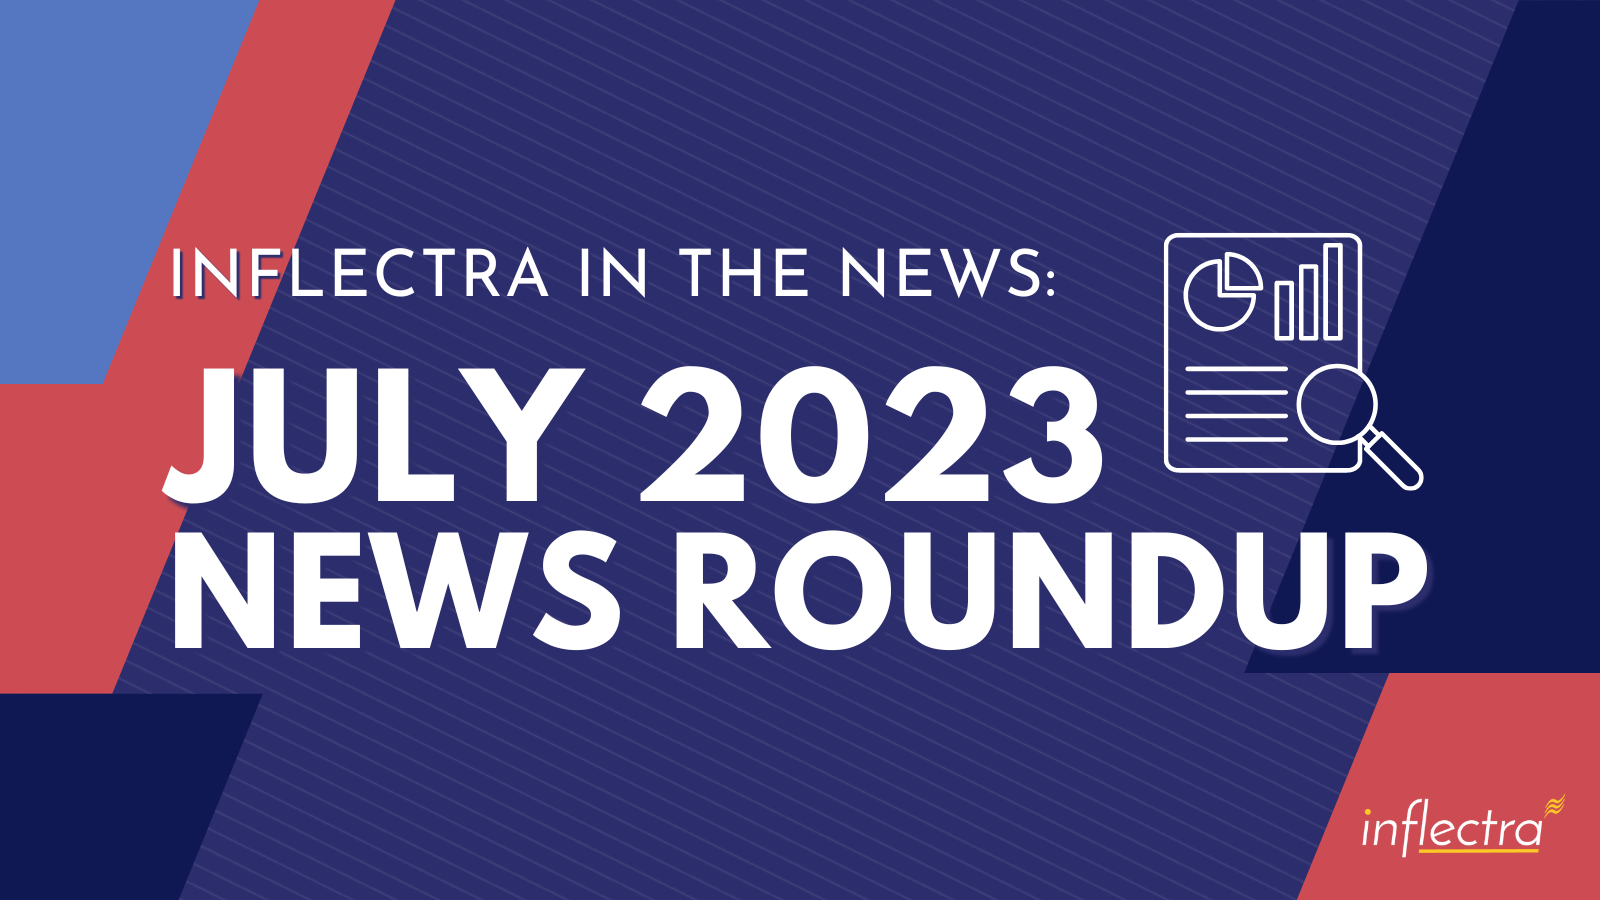 inflectra-in-the-news-july-public-relations-roundup-image